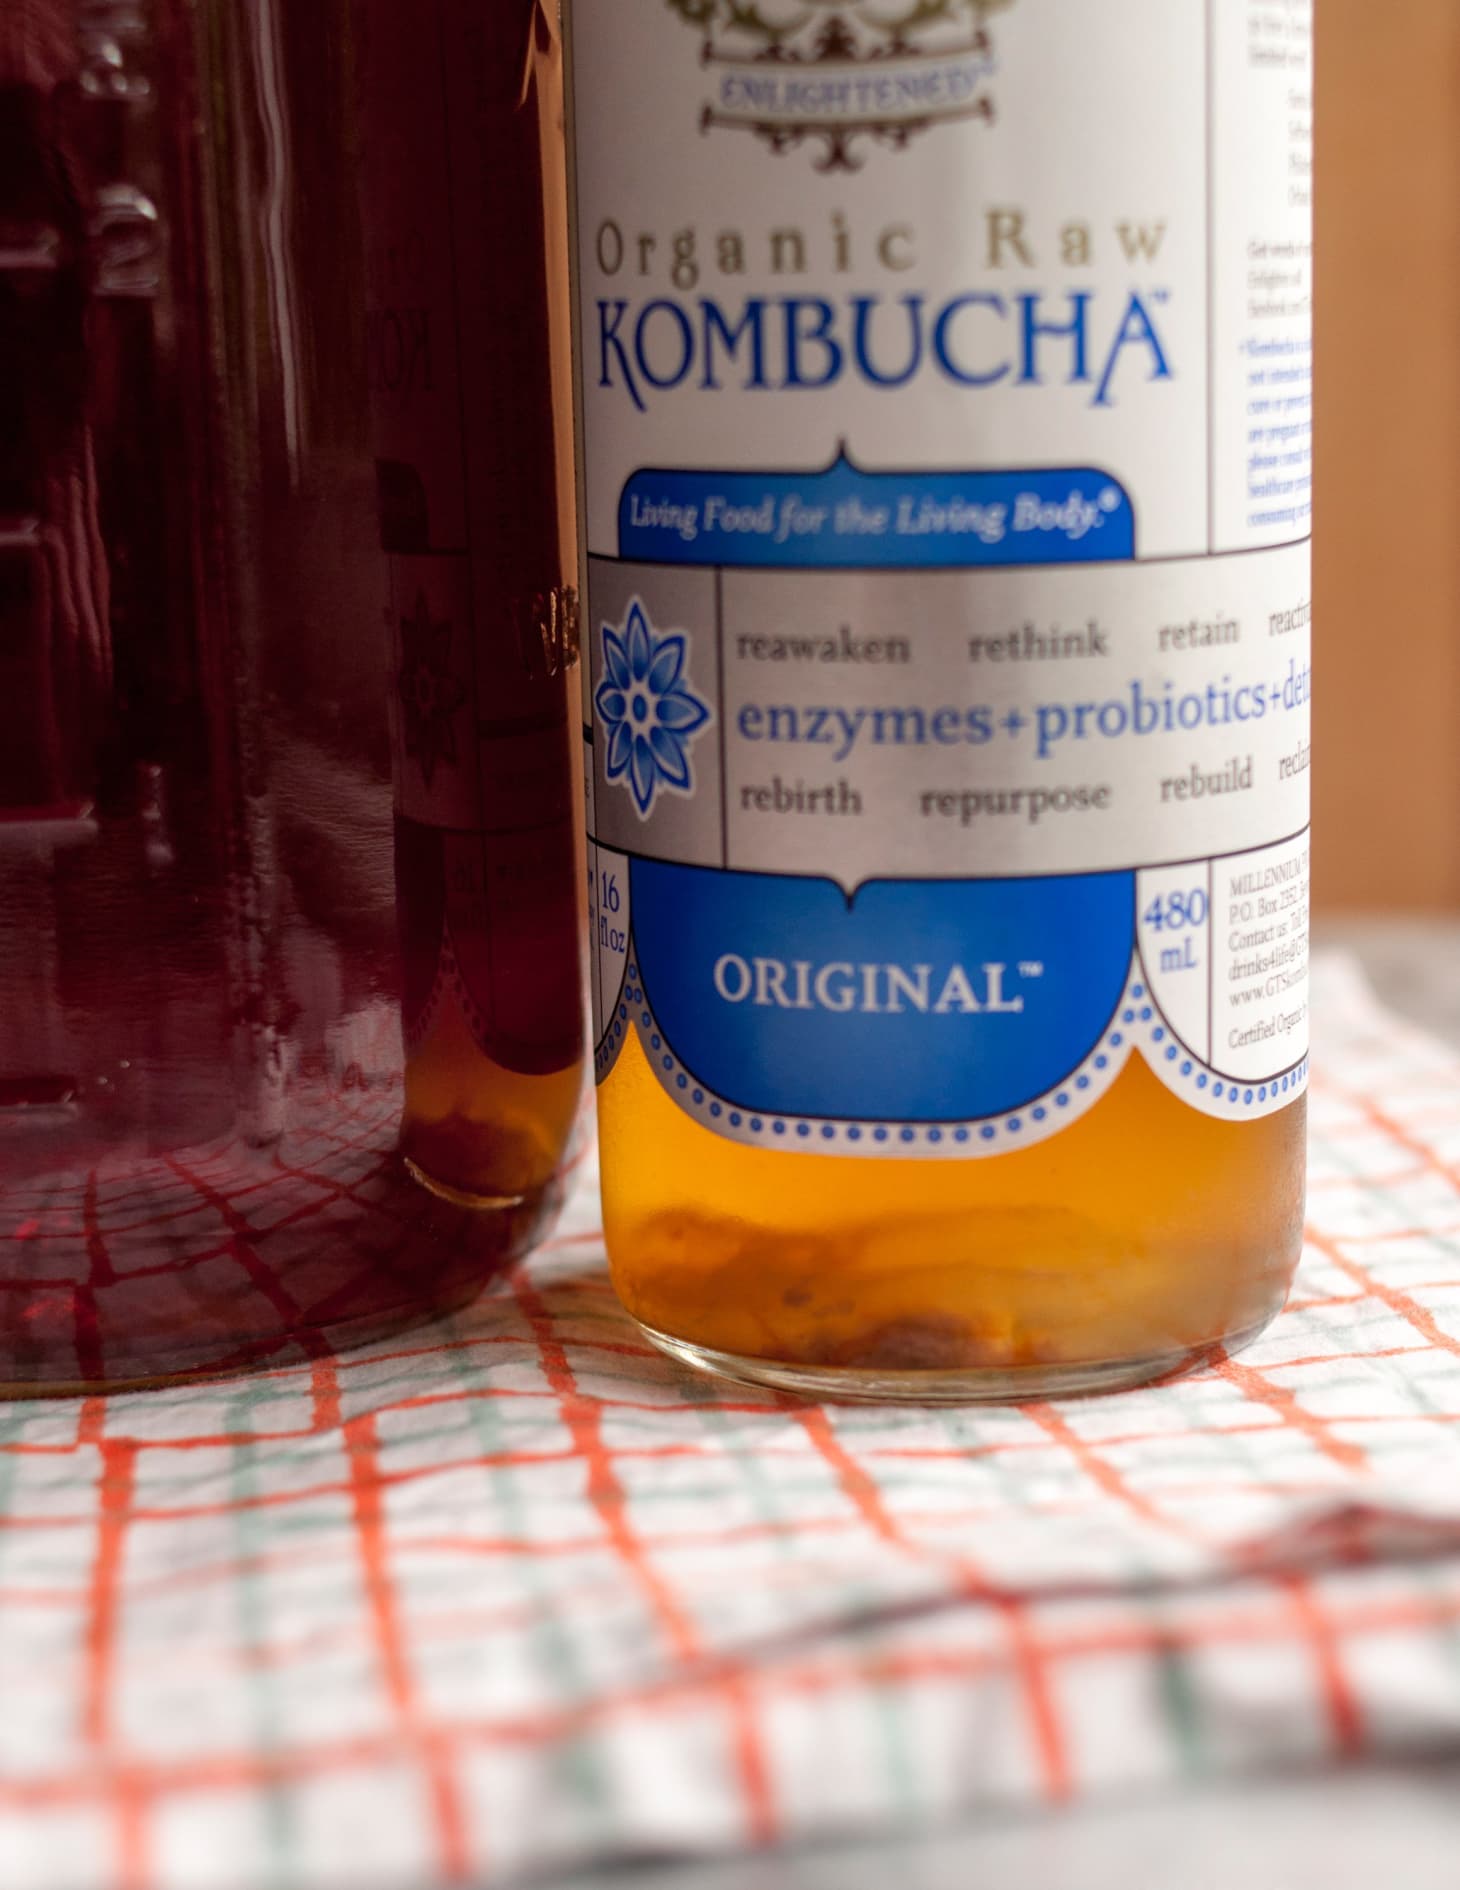 How To Make Your Own Kombucha Scoby | Kitchn